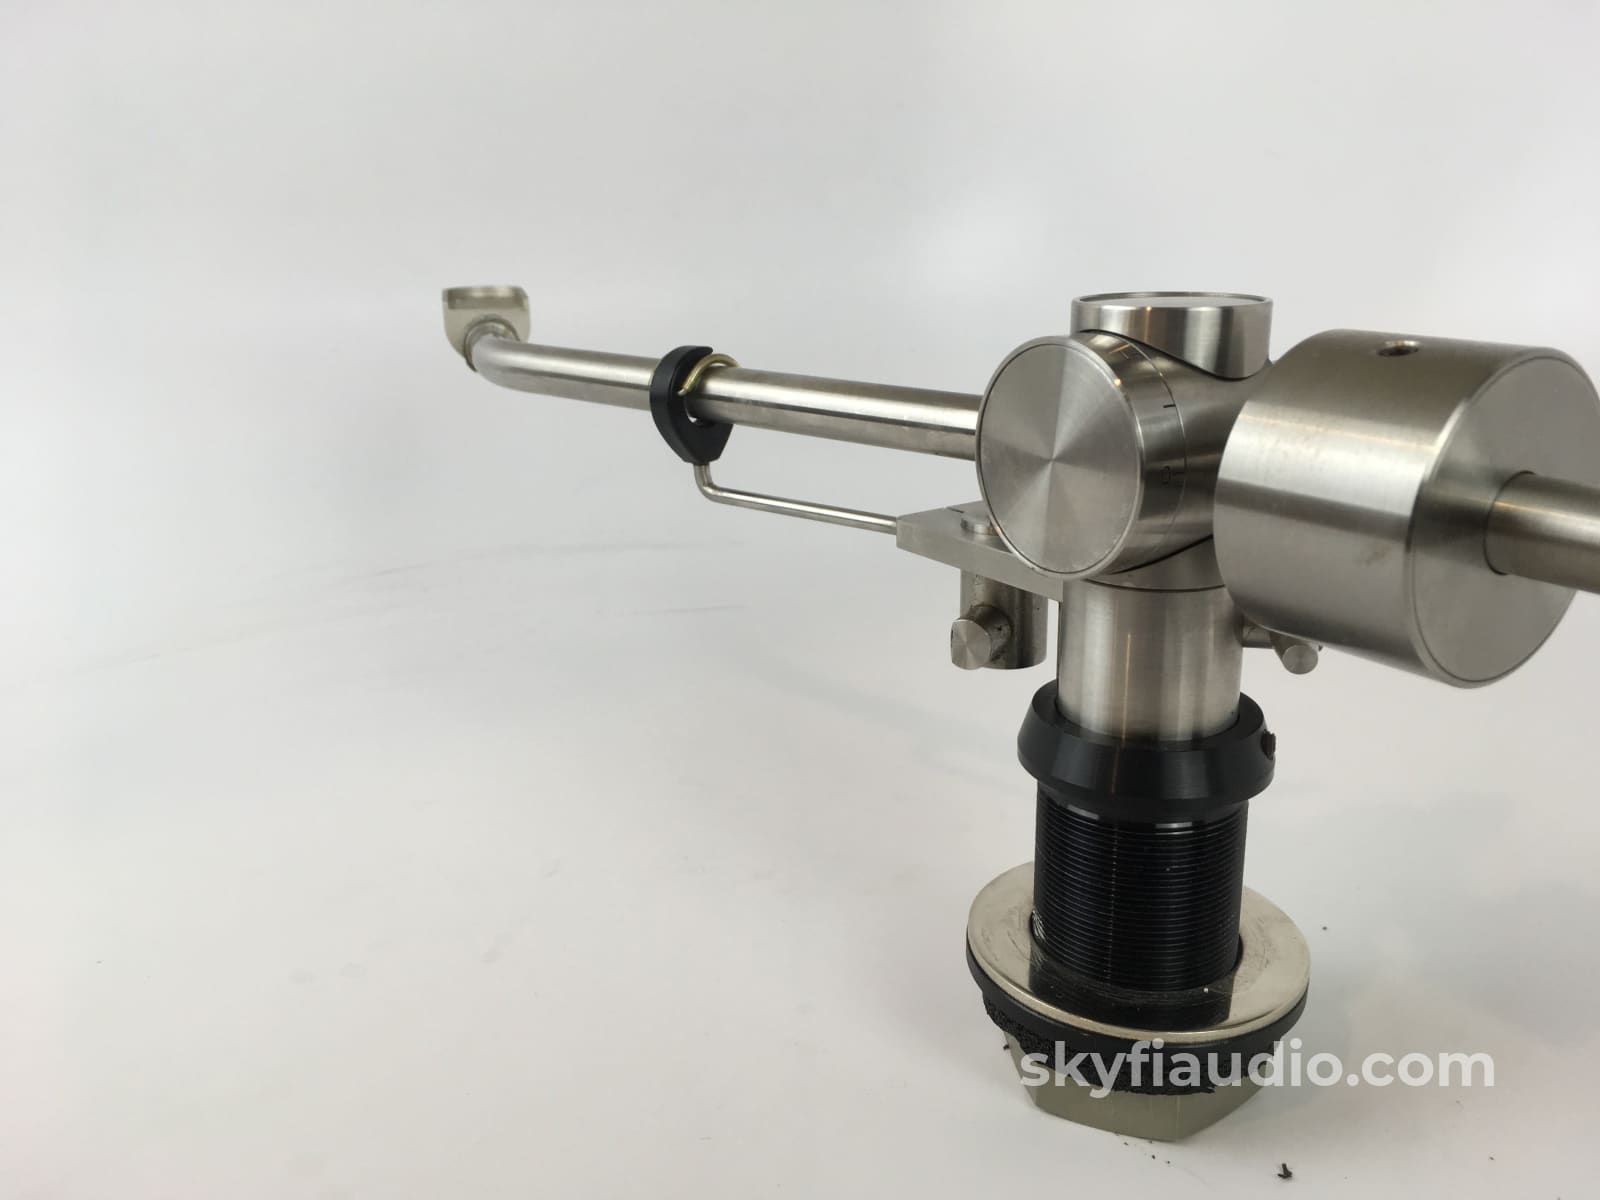 Fidelity Research Fr-64S Tonearm - Vintage Nos (New Old Stock) Rare Find Turntable